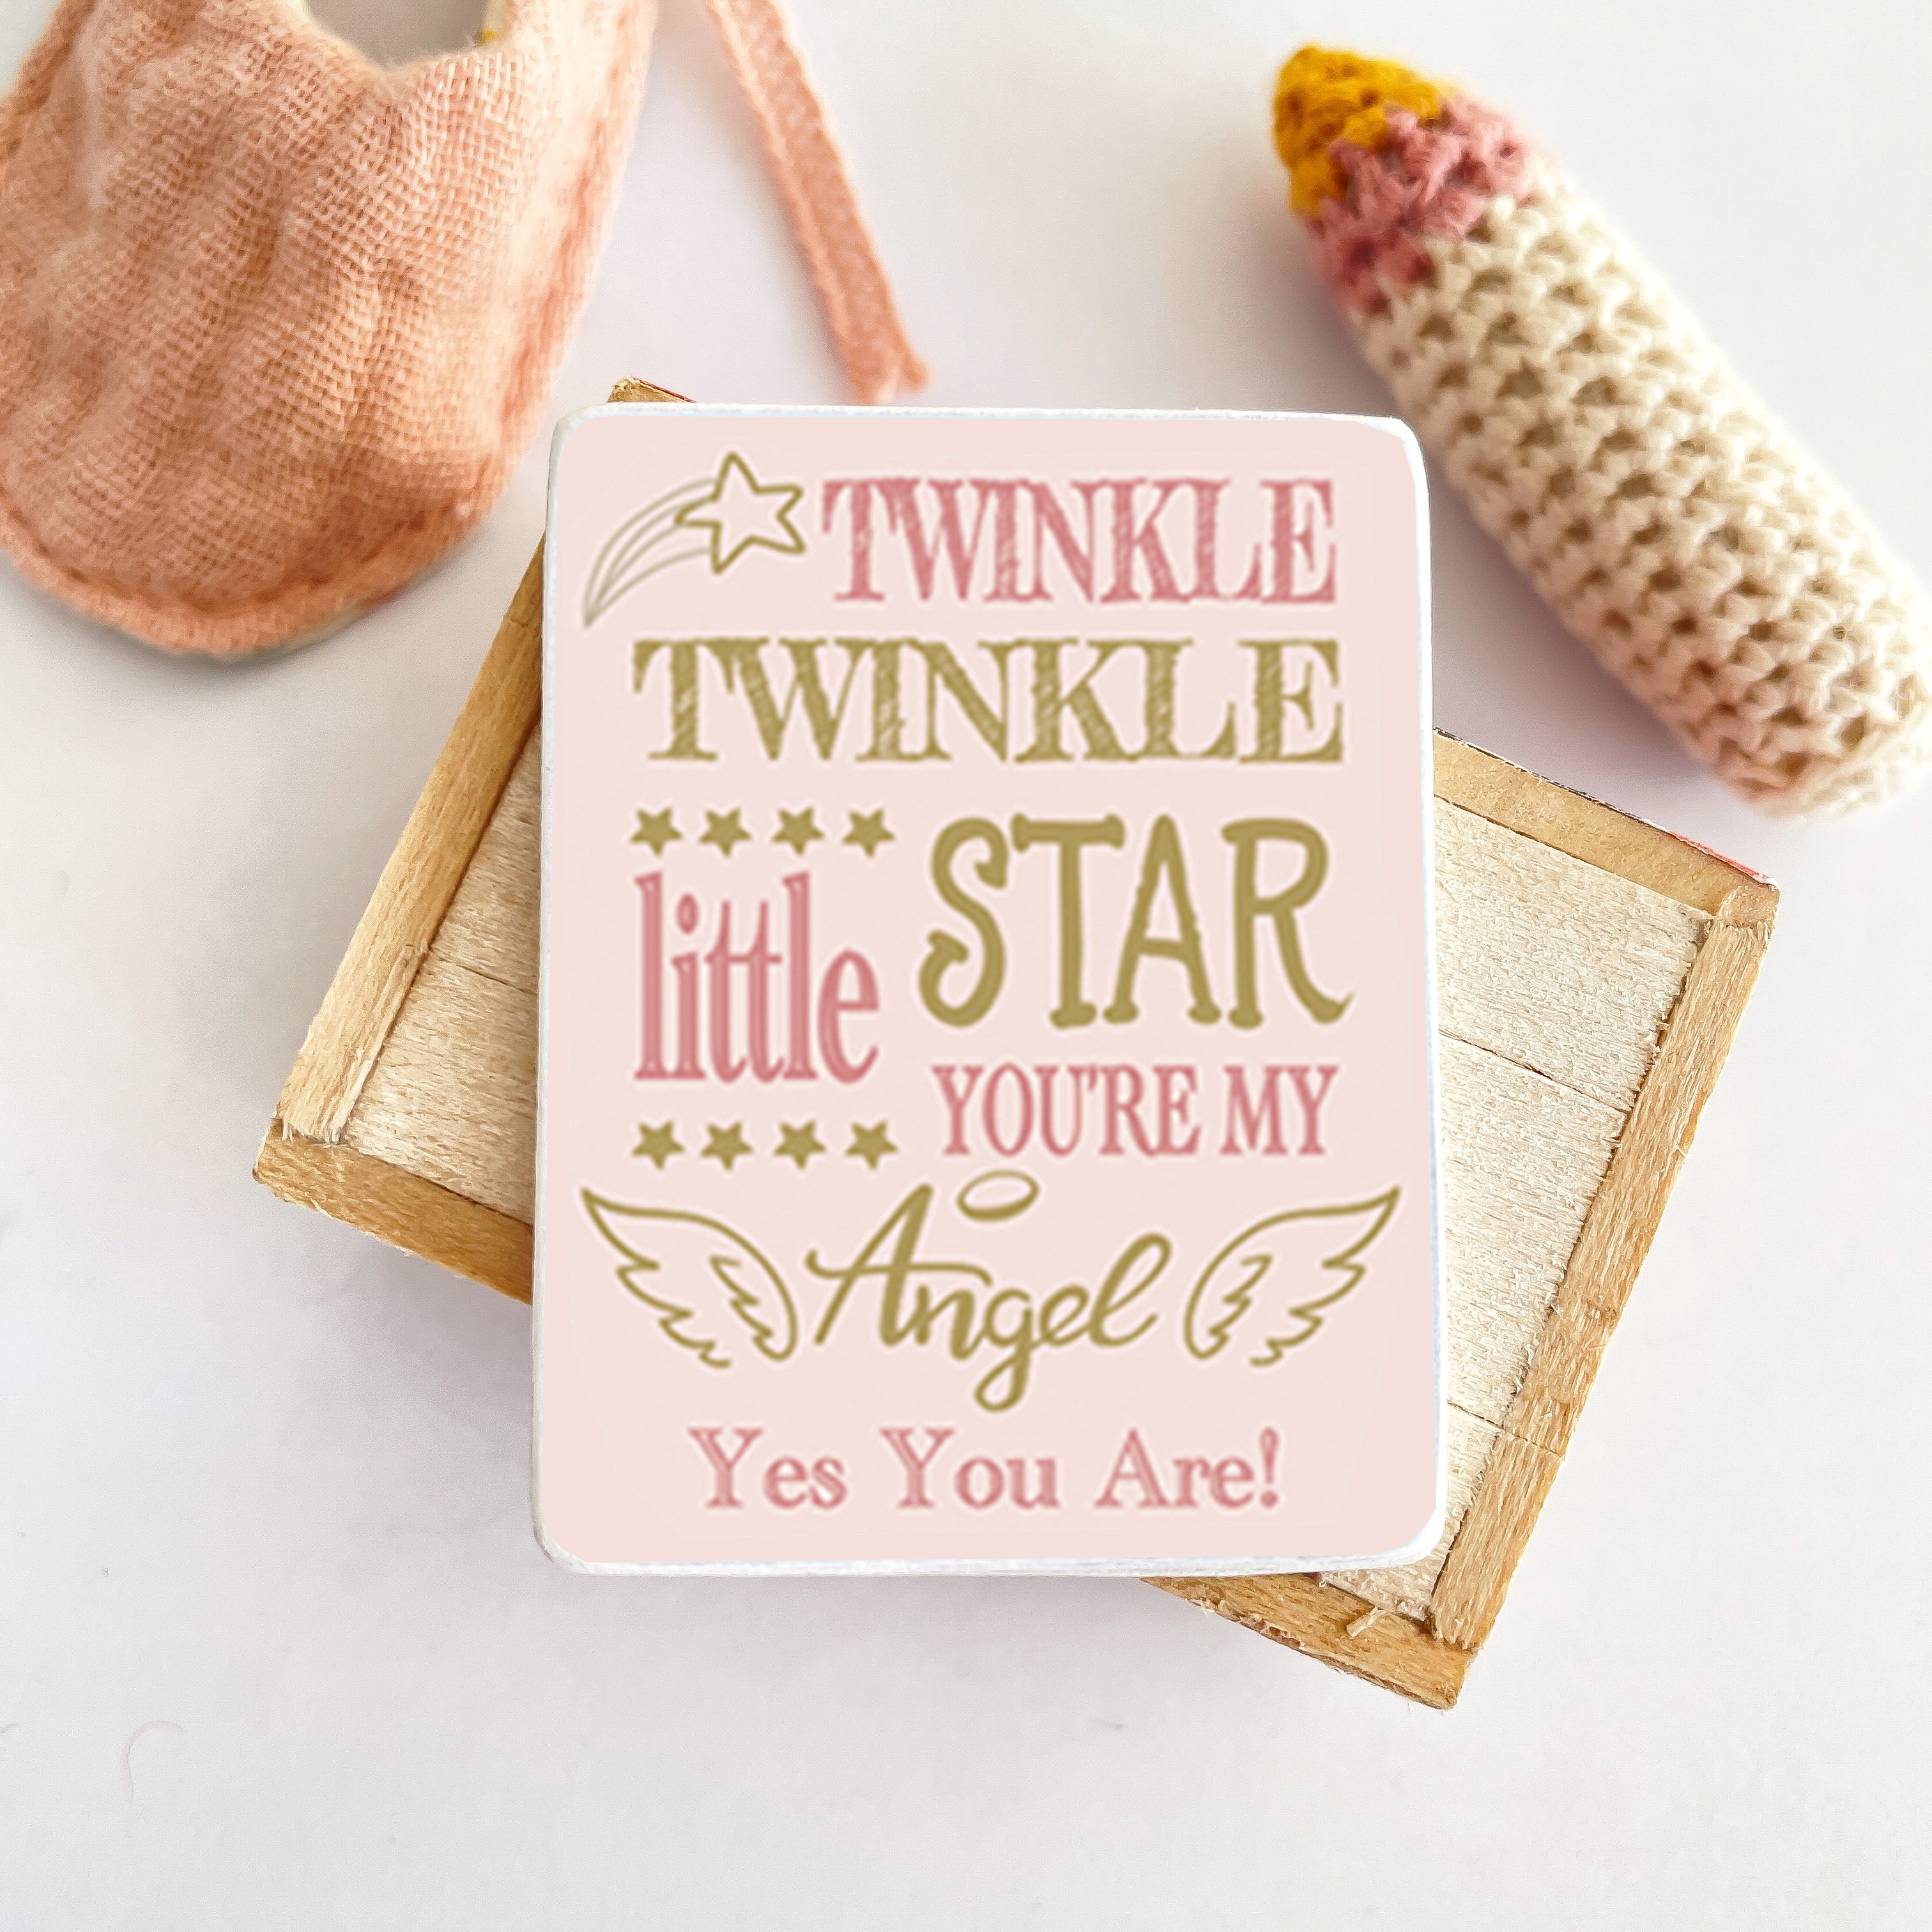 Miniature Dolls House Sign, Twinkle Twinkle Little Star - Pink & Gold